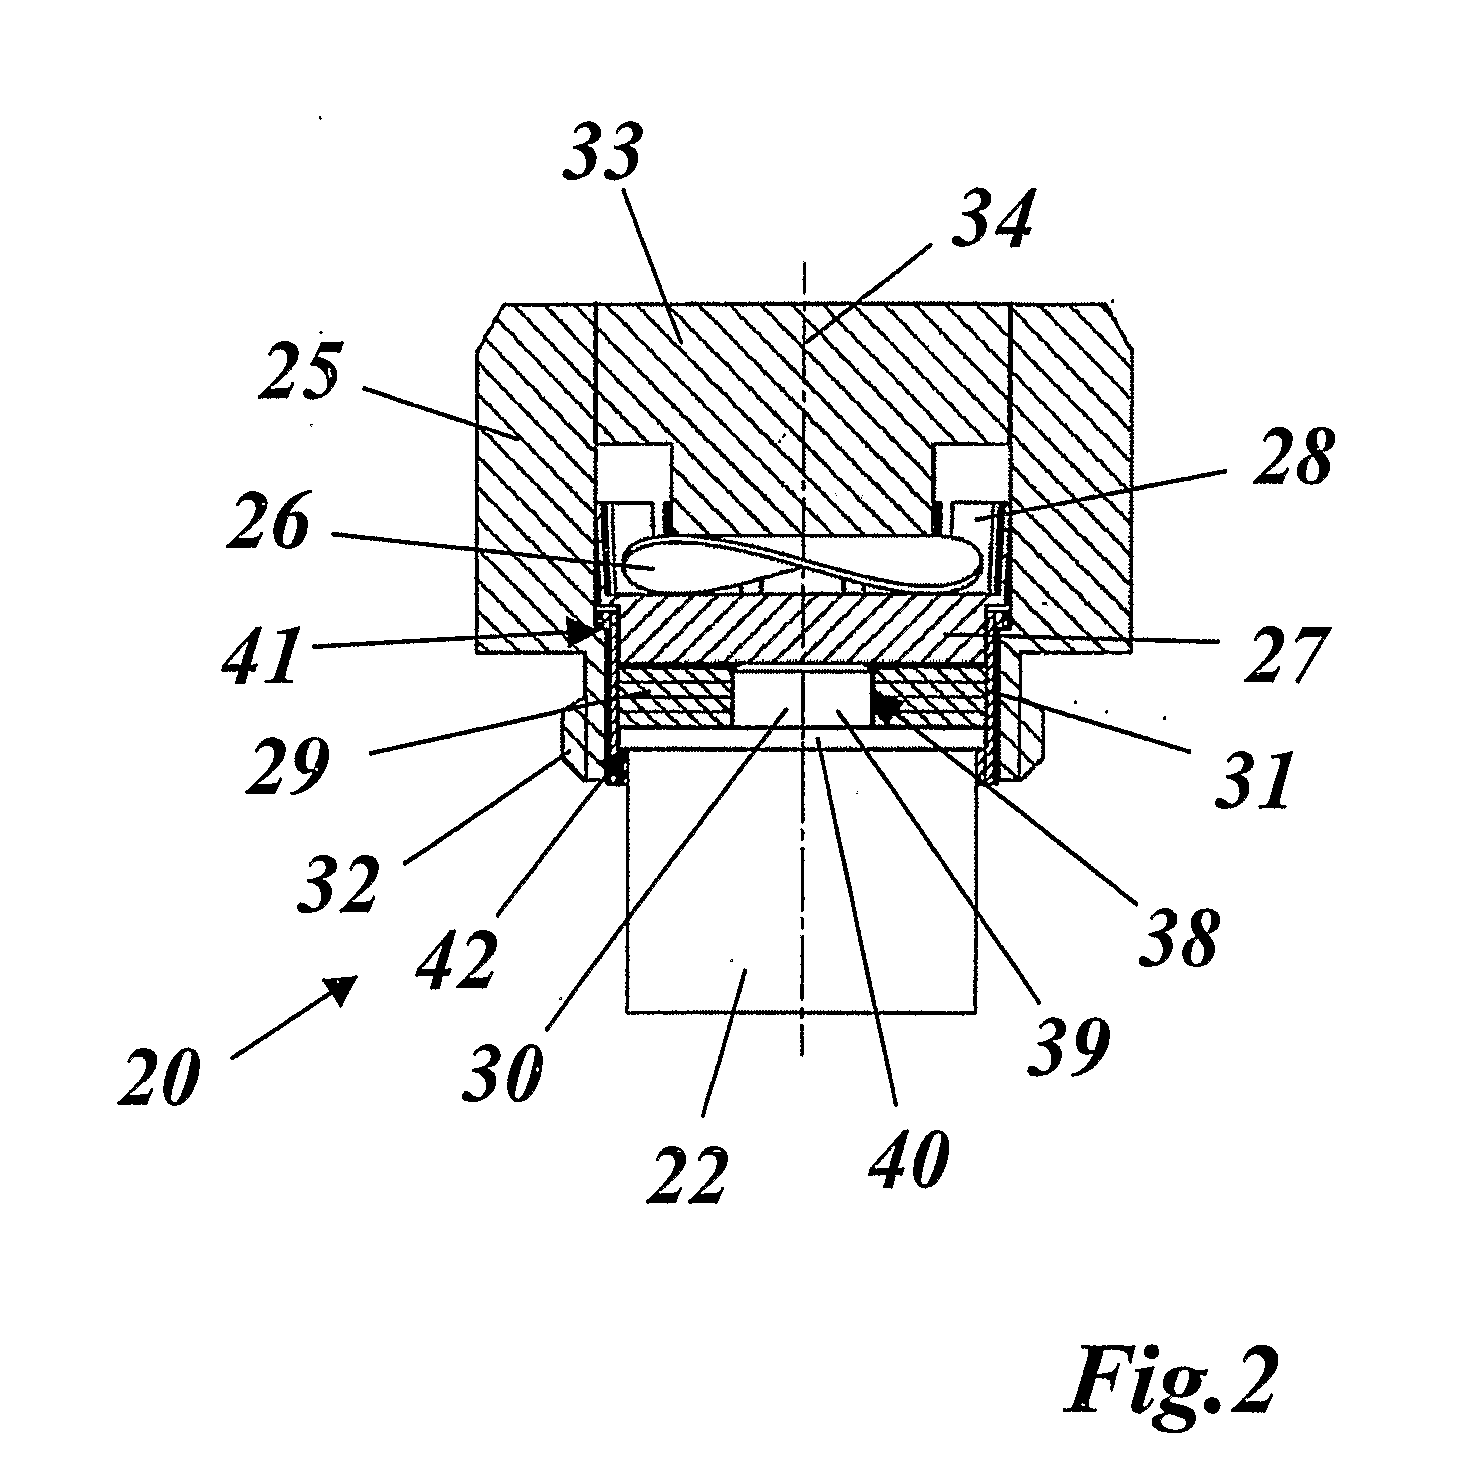 Automatically Quenching Surge Arrester Arrangement and Use of Such a Surge Arrester Arrangement